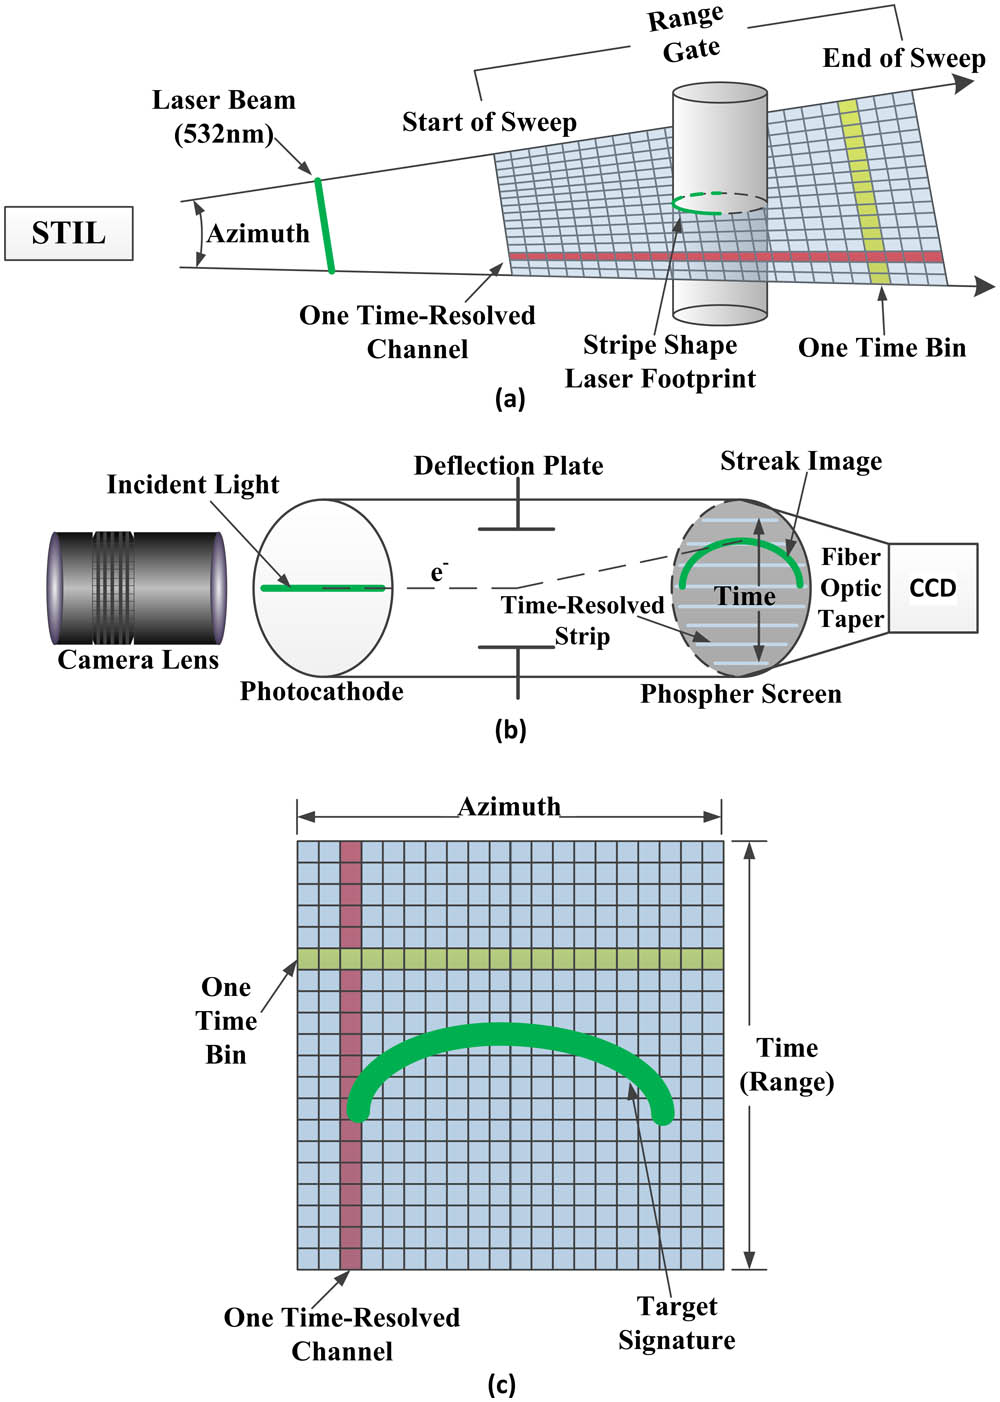 (a) Schematic diagram of the STIL data collection process, (b) illustration of the work principle of the streak tube detector, and (c) the streak image at the phosphor screen, as captured by the CCD.